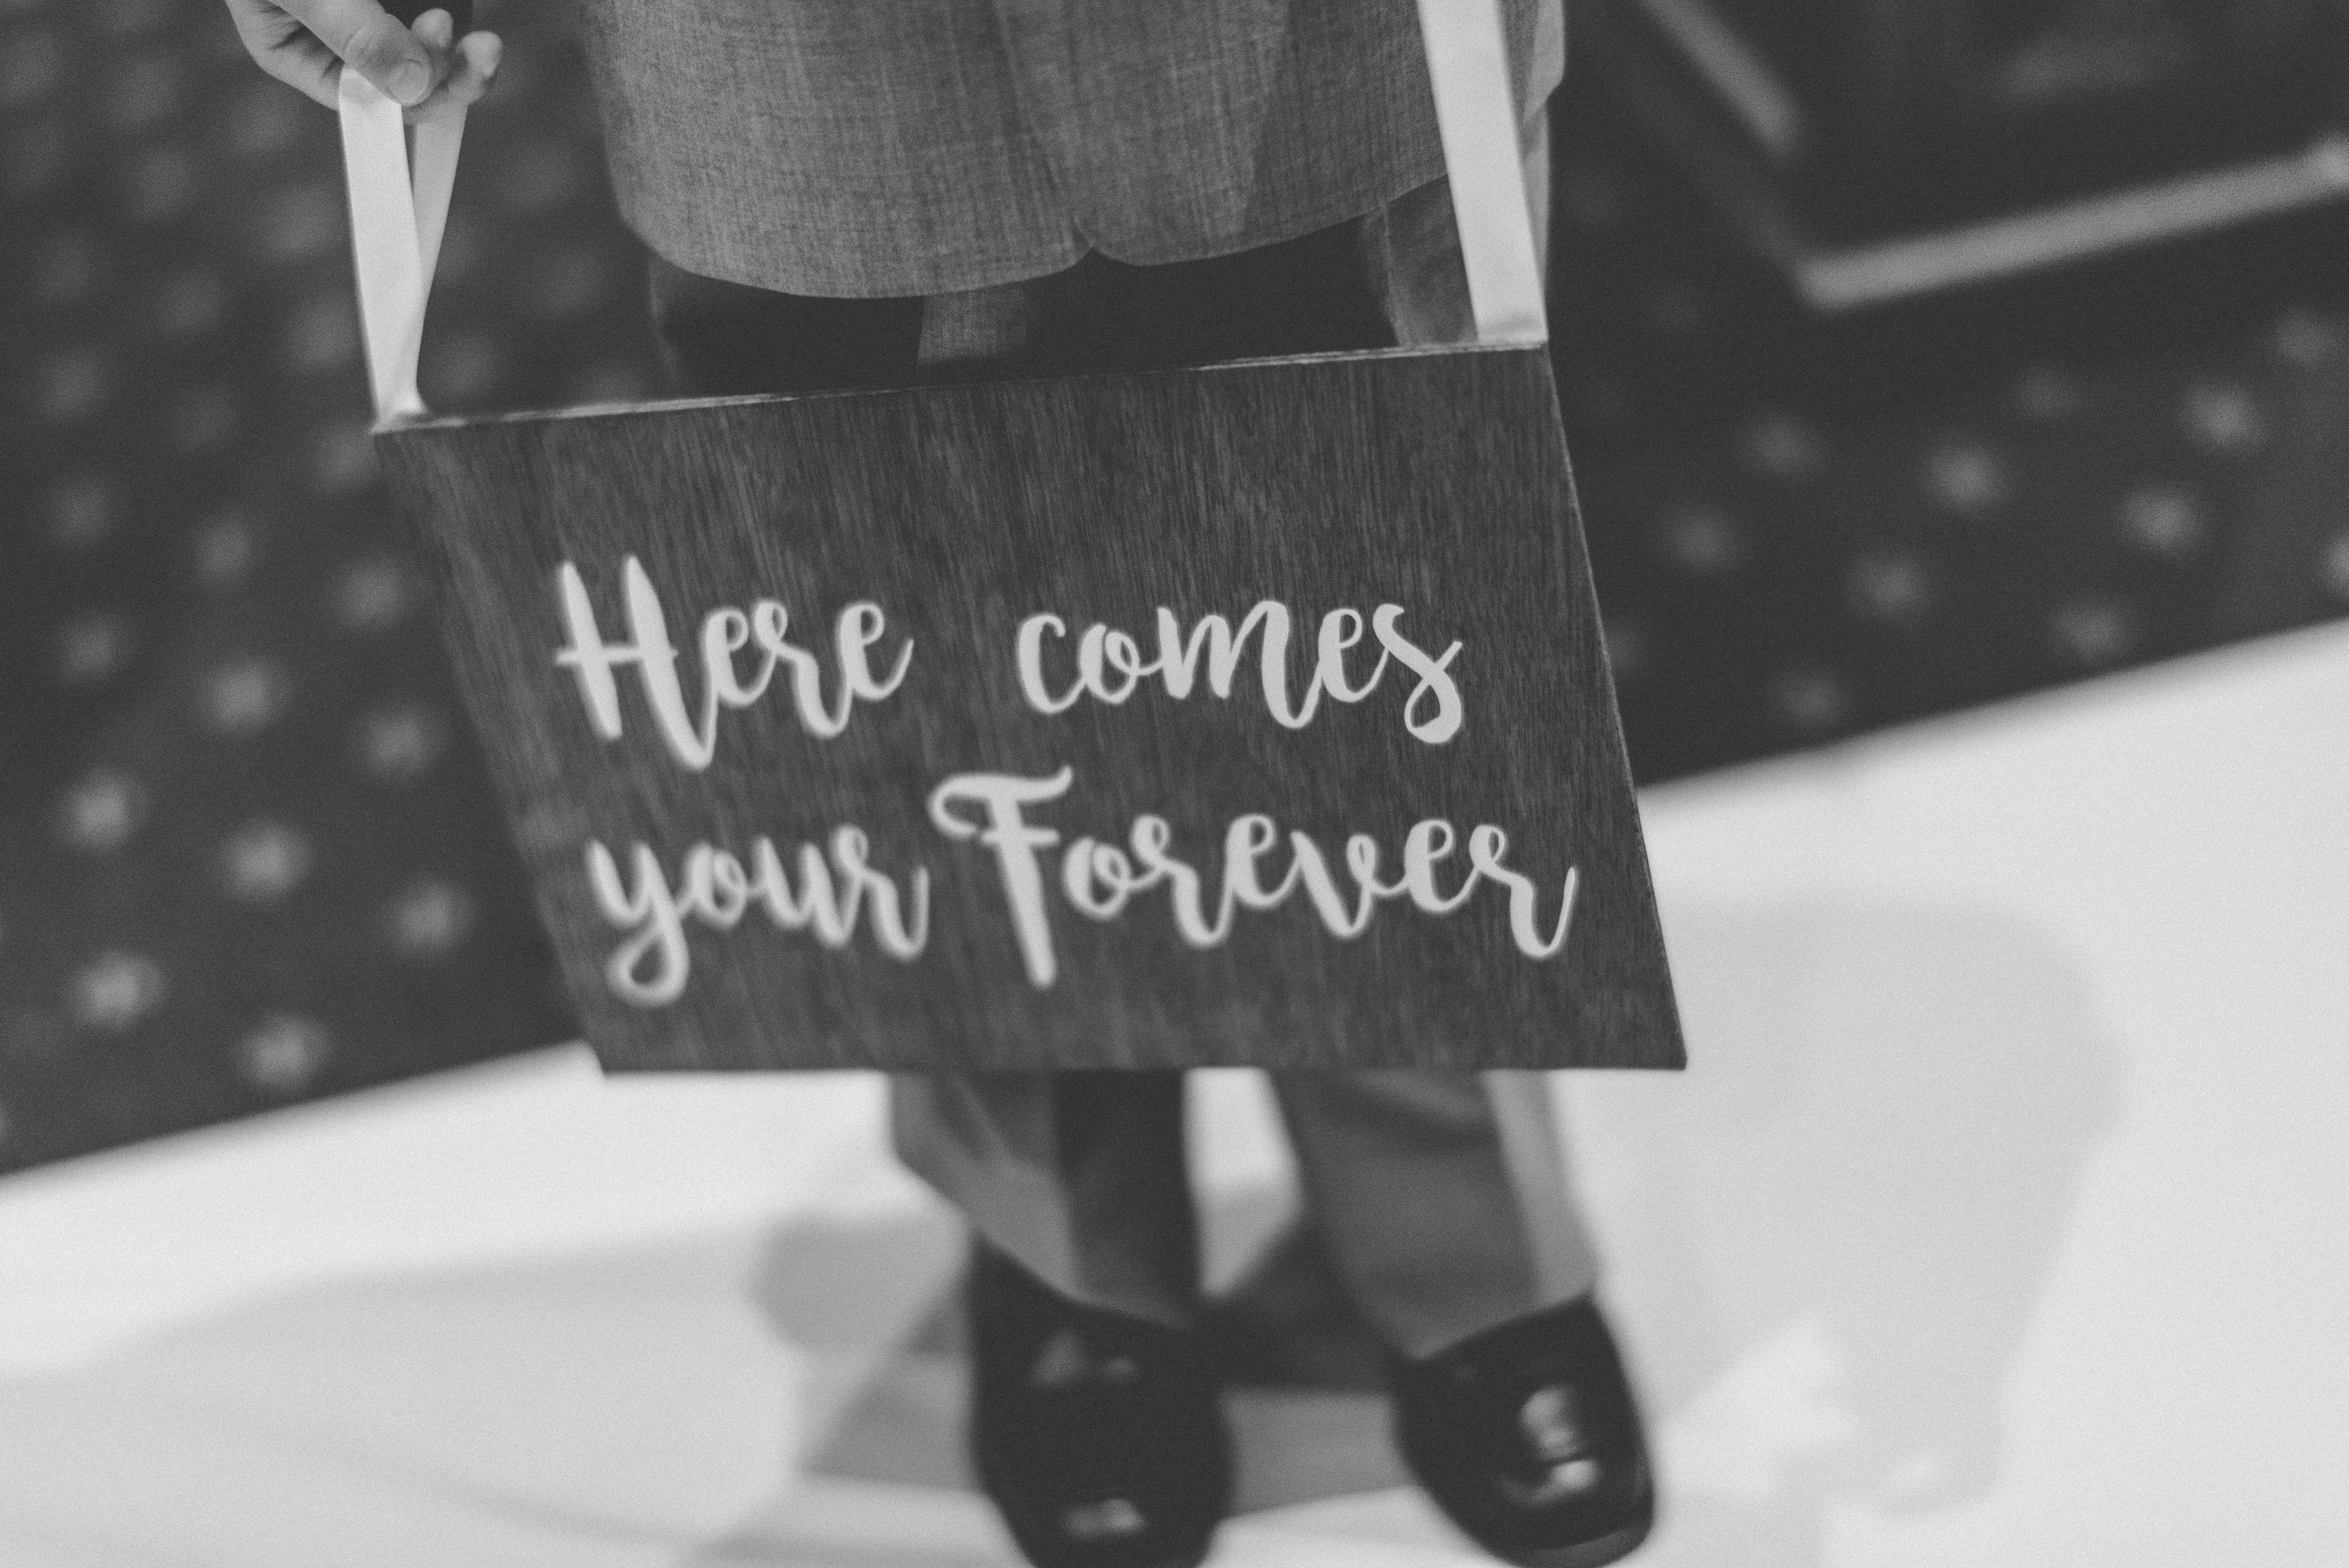 Wooden wedding sign "Here comes your forever"